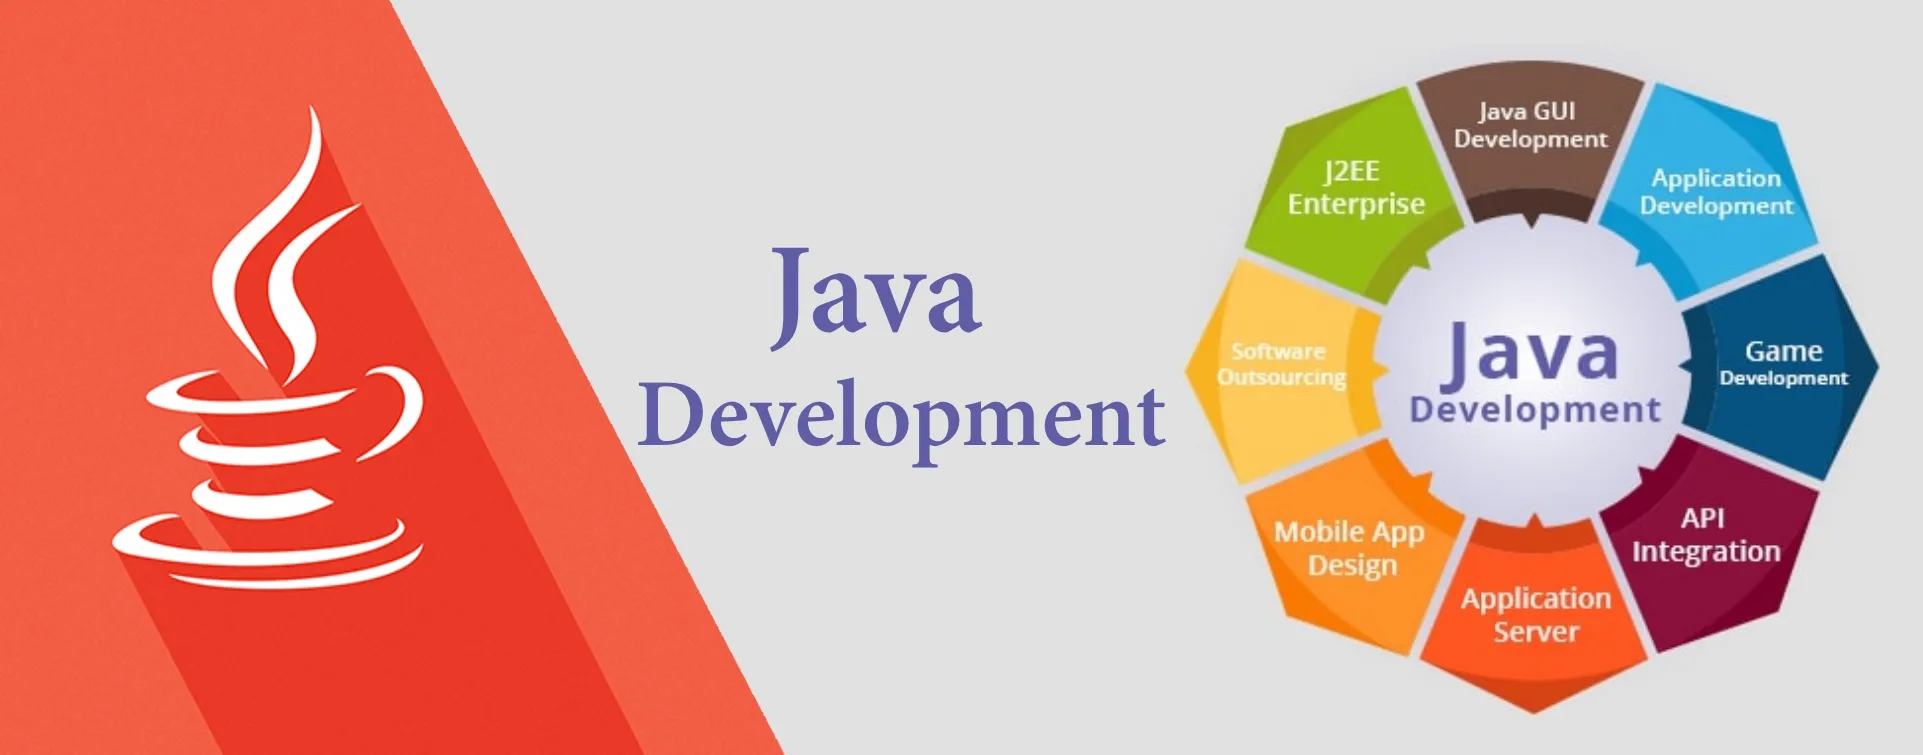 Top Java Web Development Companies In Usa For 2019 - 